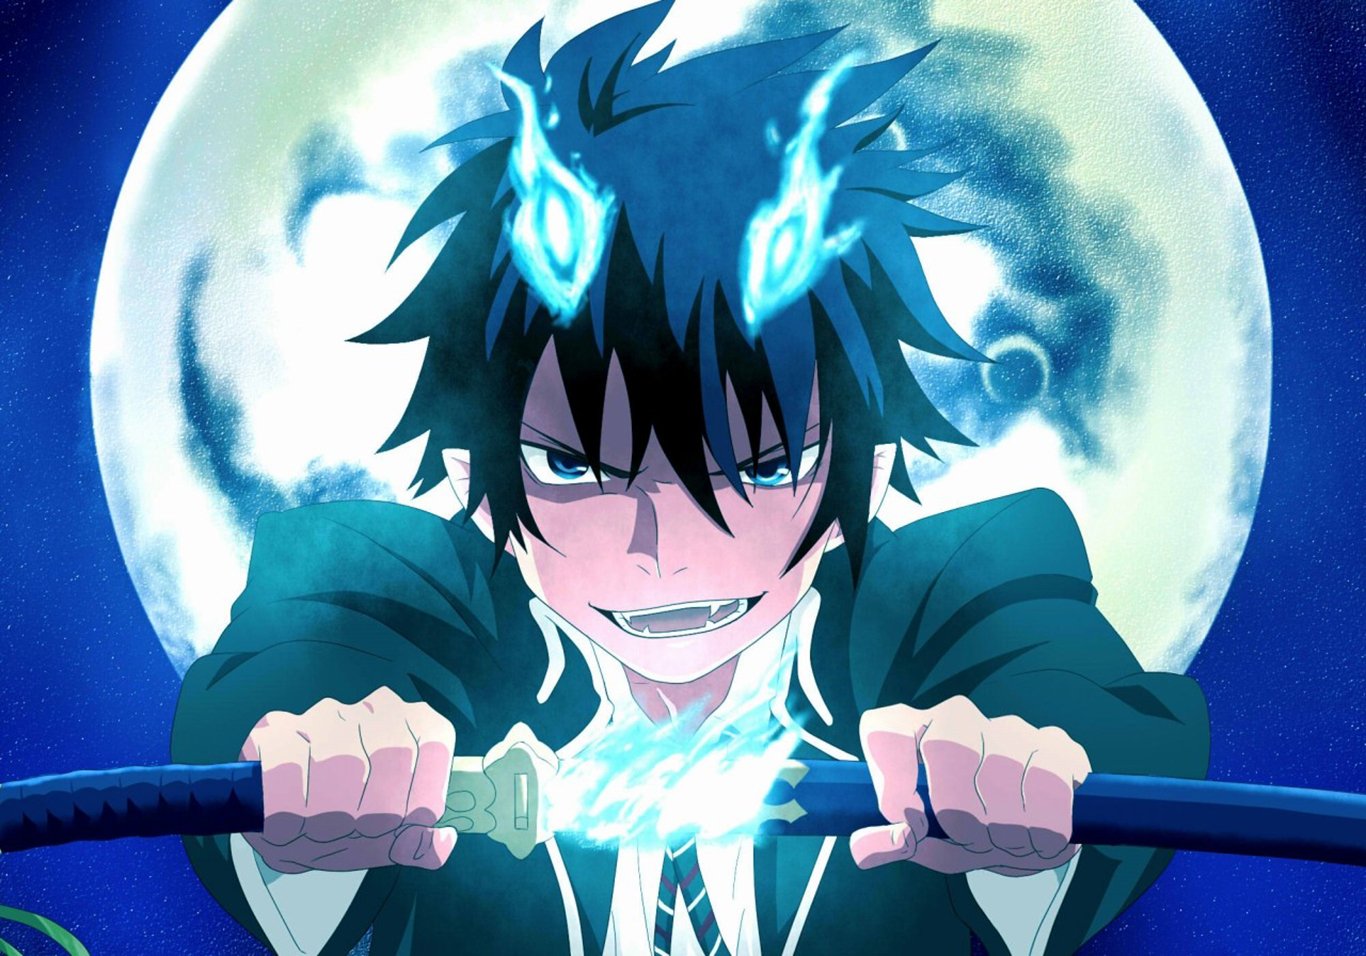 5. "Blue Exorcist" - wide 8